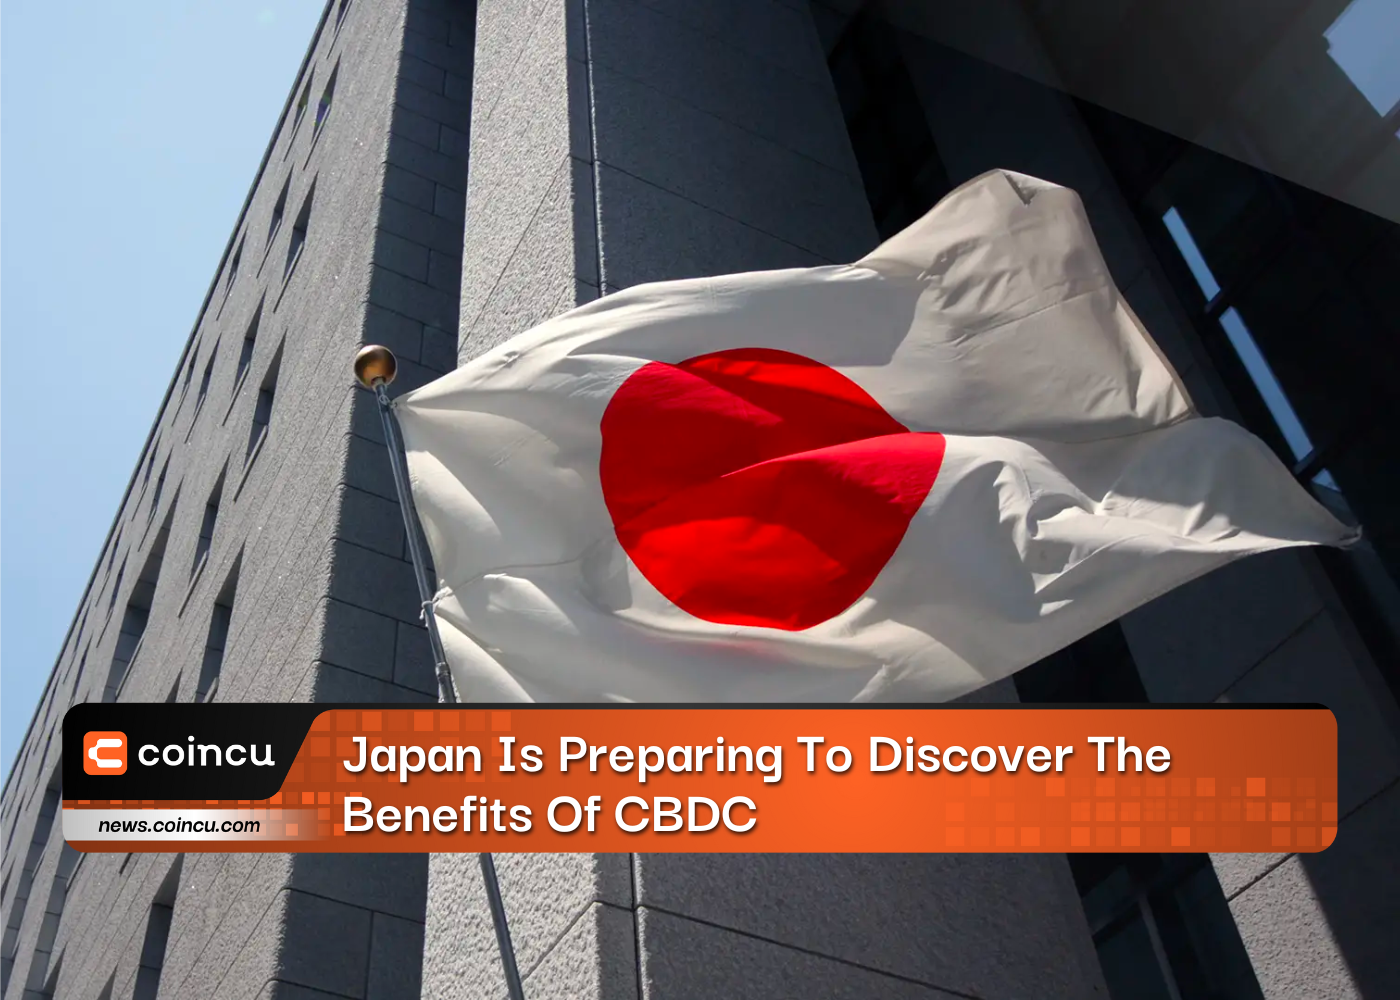 Japan Is Preparing To Discover The Benefits Of CBDC